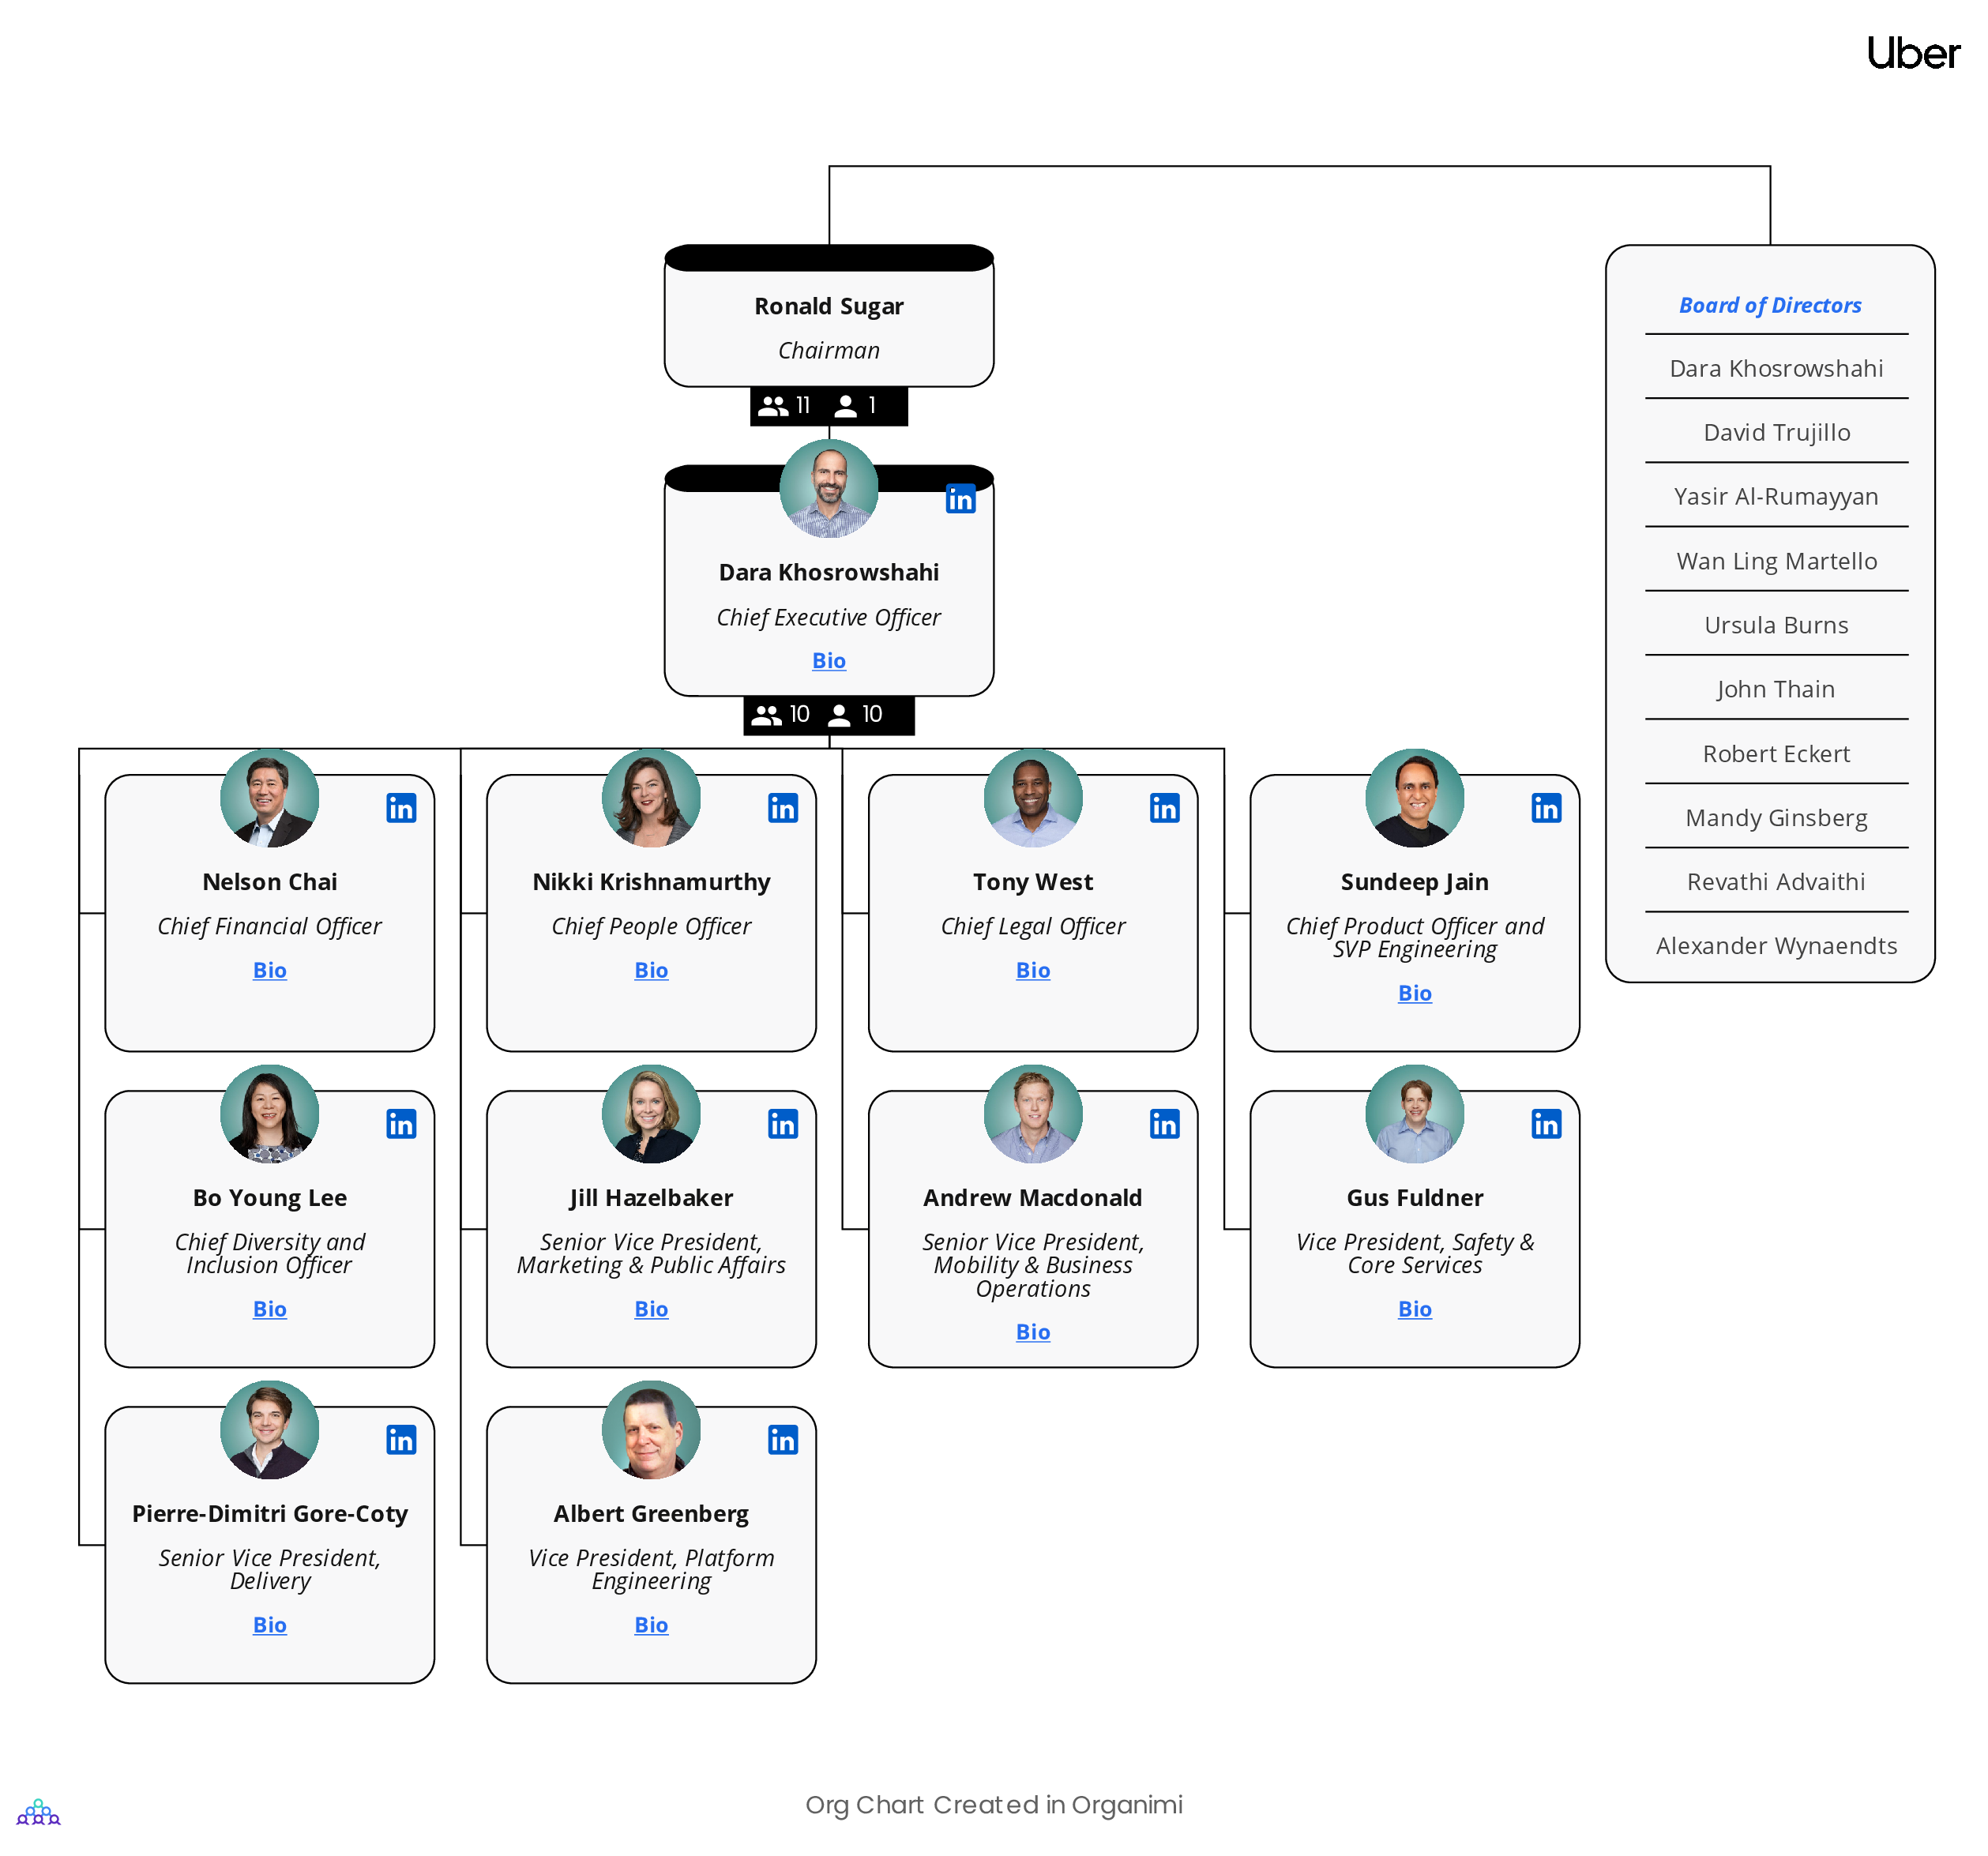 Uber's Organizational Structure Org Chart